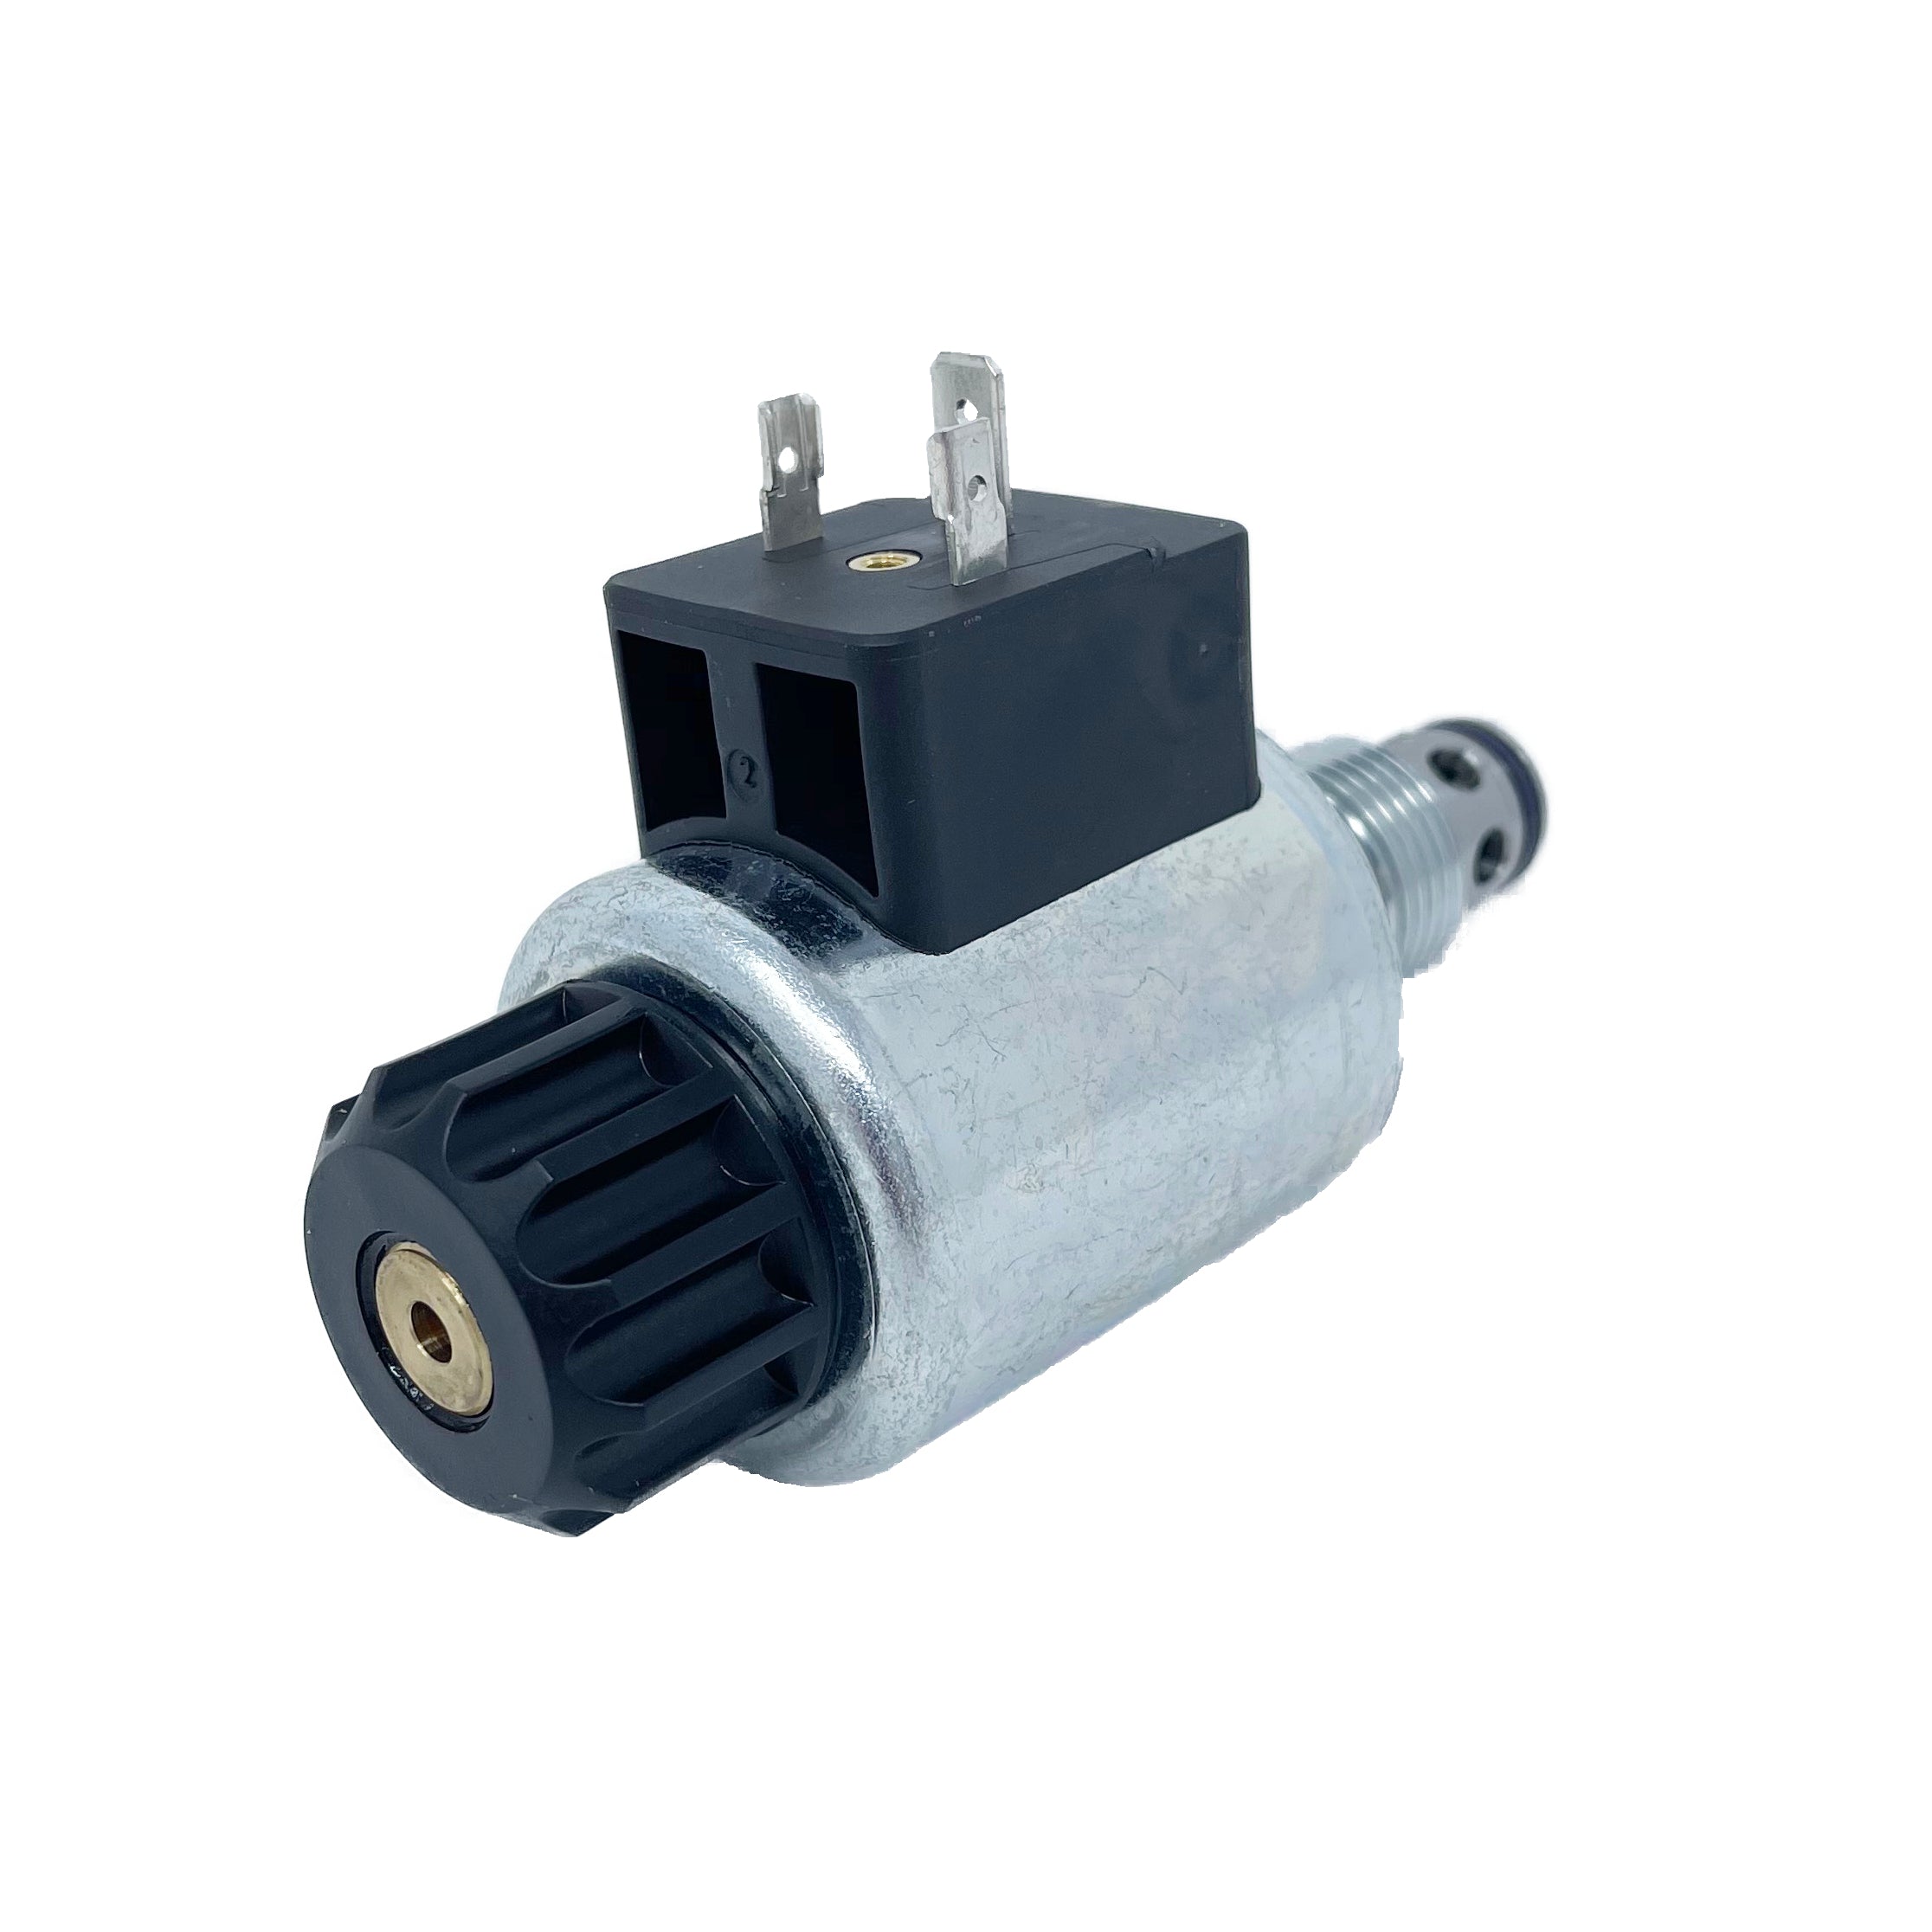 SD3E-B2/H2O2A24DIN : Argo DCV, 16GPM, 5100psi, 2P2W, C-10-2, 24 VDC DIN, Flow 1 to 2 Neutral